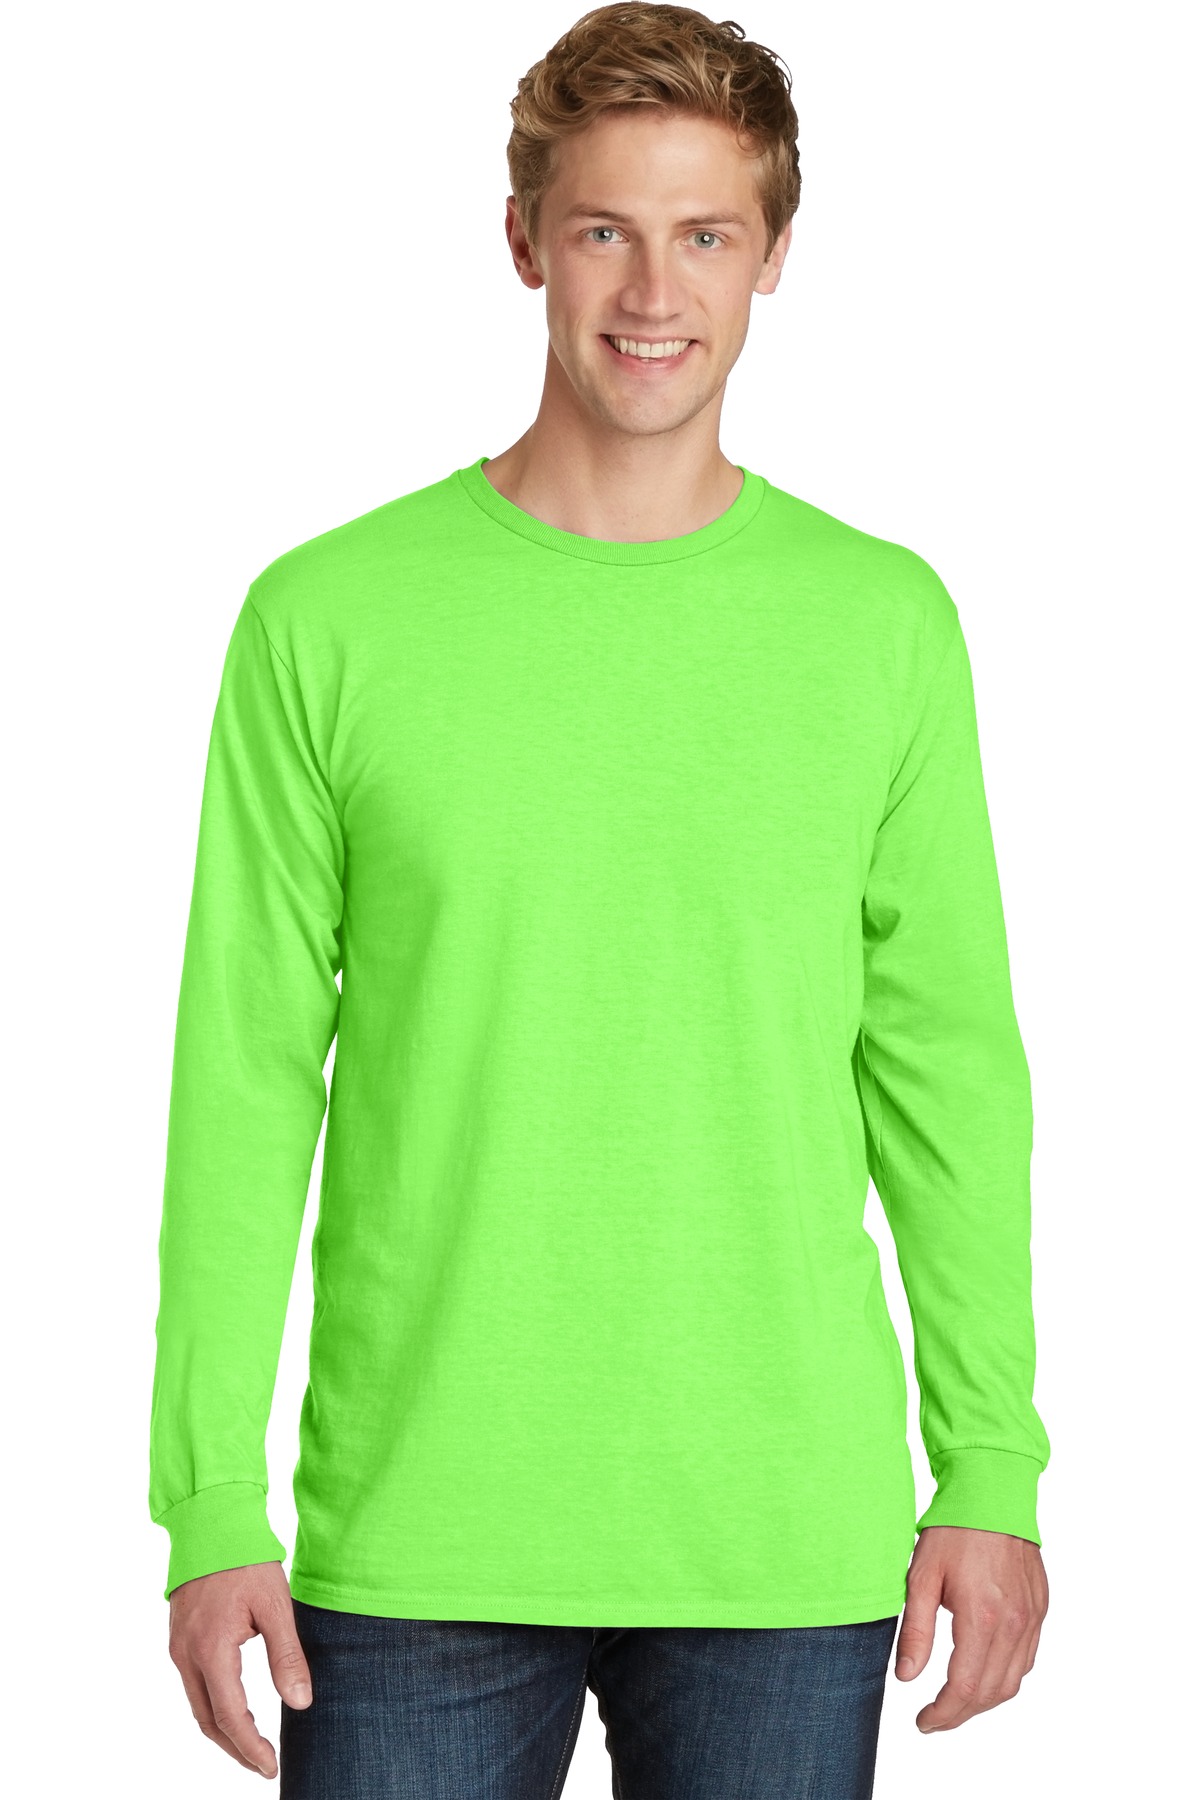 Port & Company Pigment Dyed Long Sleeve Tee-XL (Neon Green) - image 1 of 6